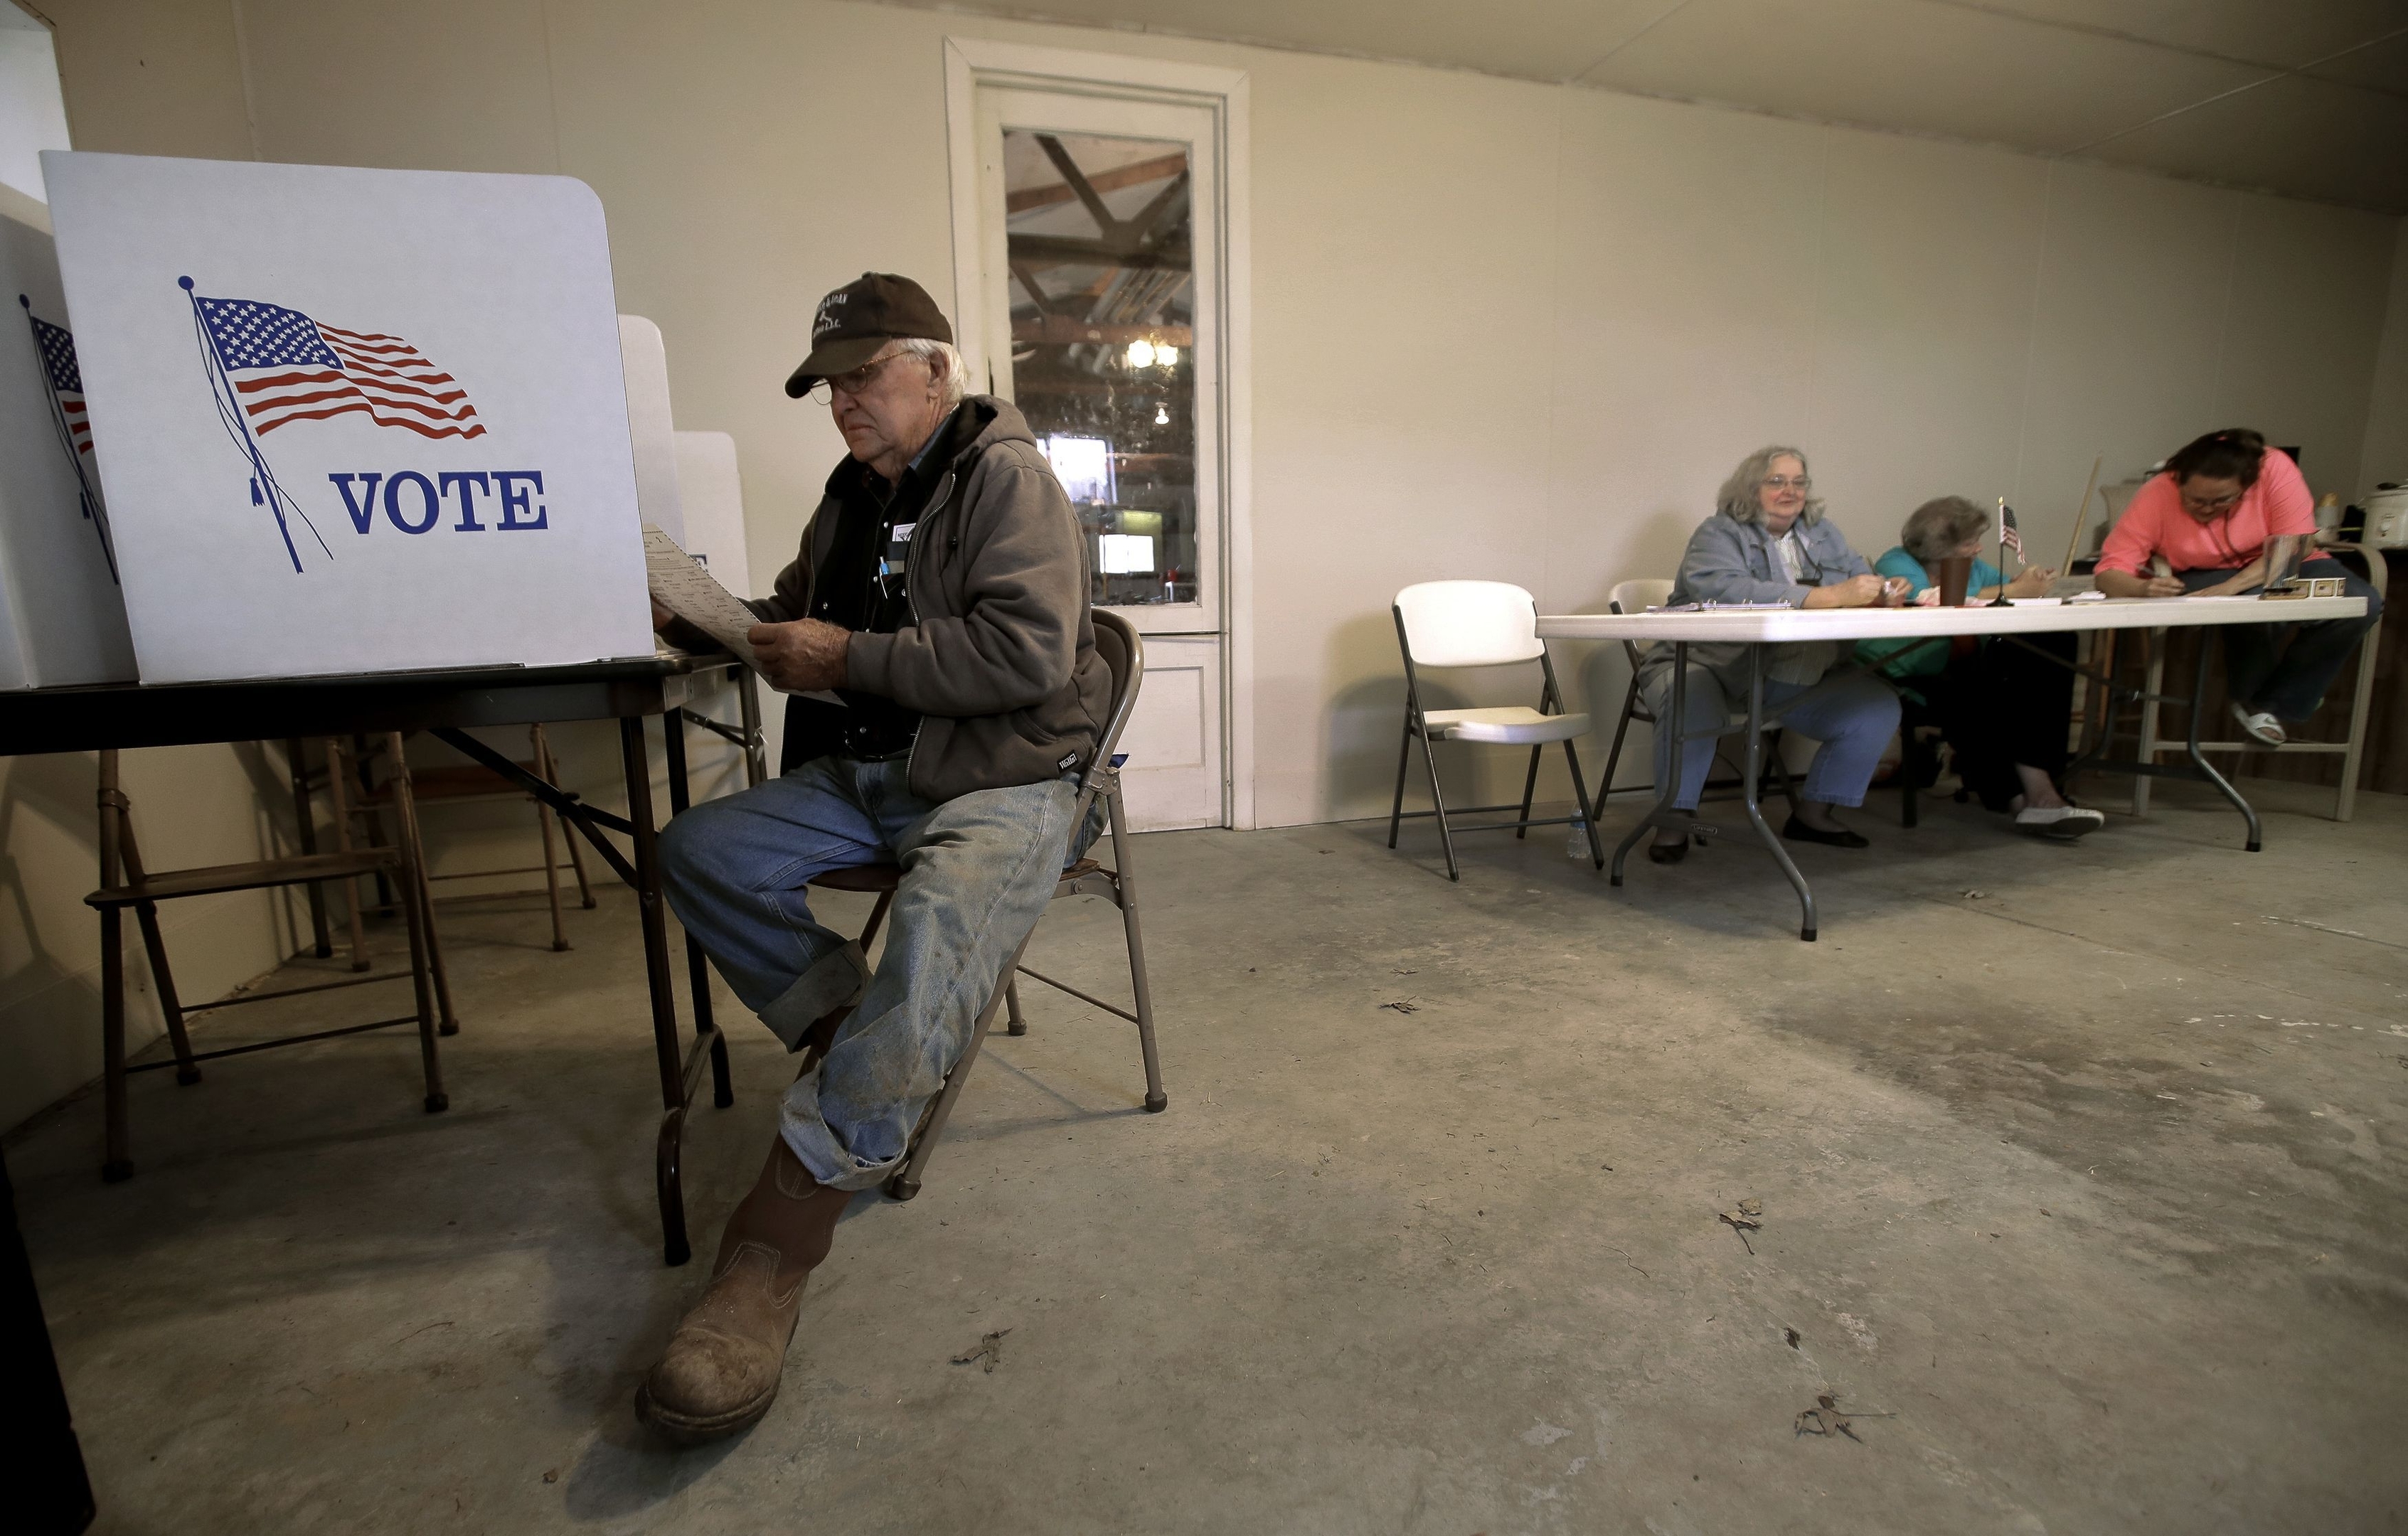 Russell Madison, from Humansville, Mo., votes in a game room on a family farm Tuesday, Nov. 8, 2016 near Humansville, Mo. (AP Photo/Charlie Riedel)